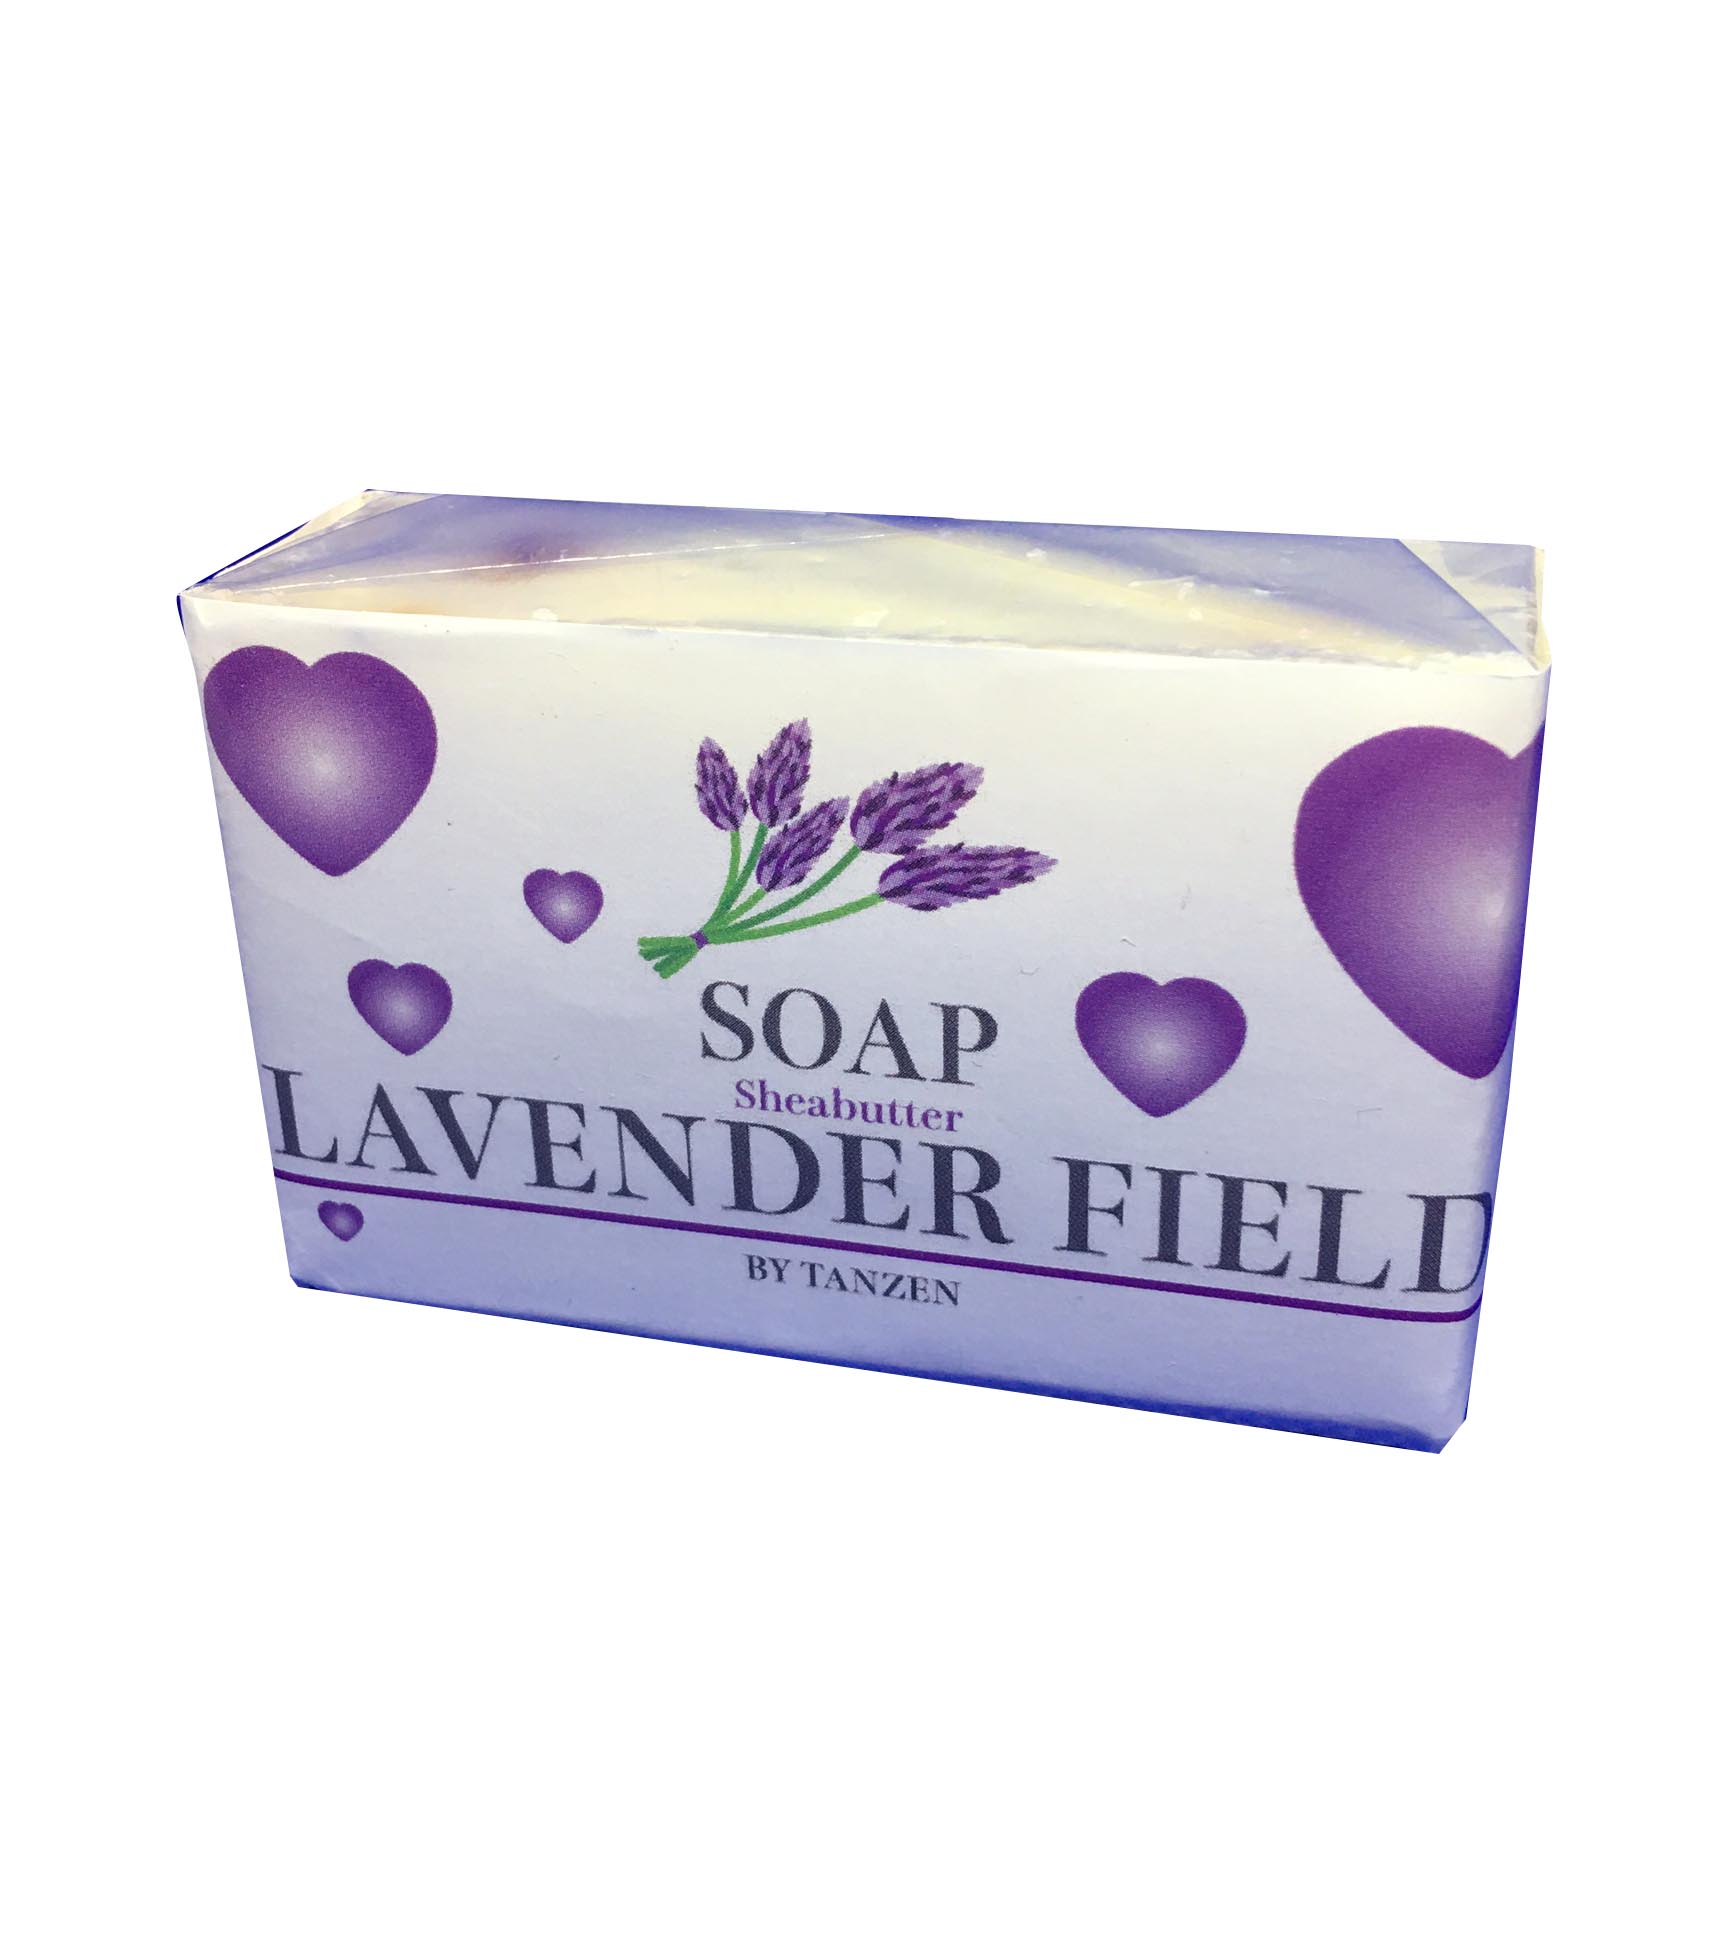 All Natural Lavender hand made foaming soap